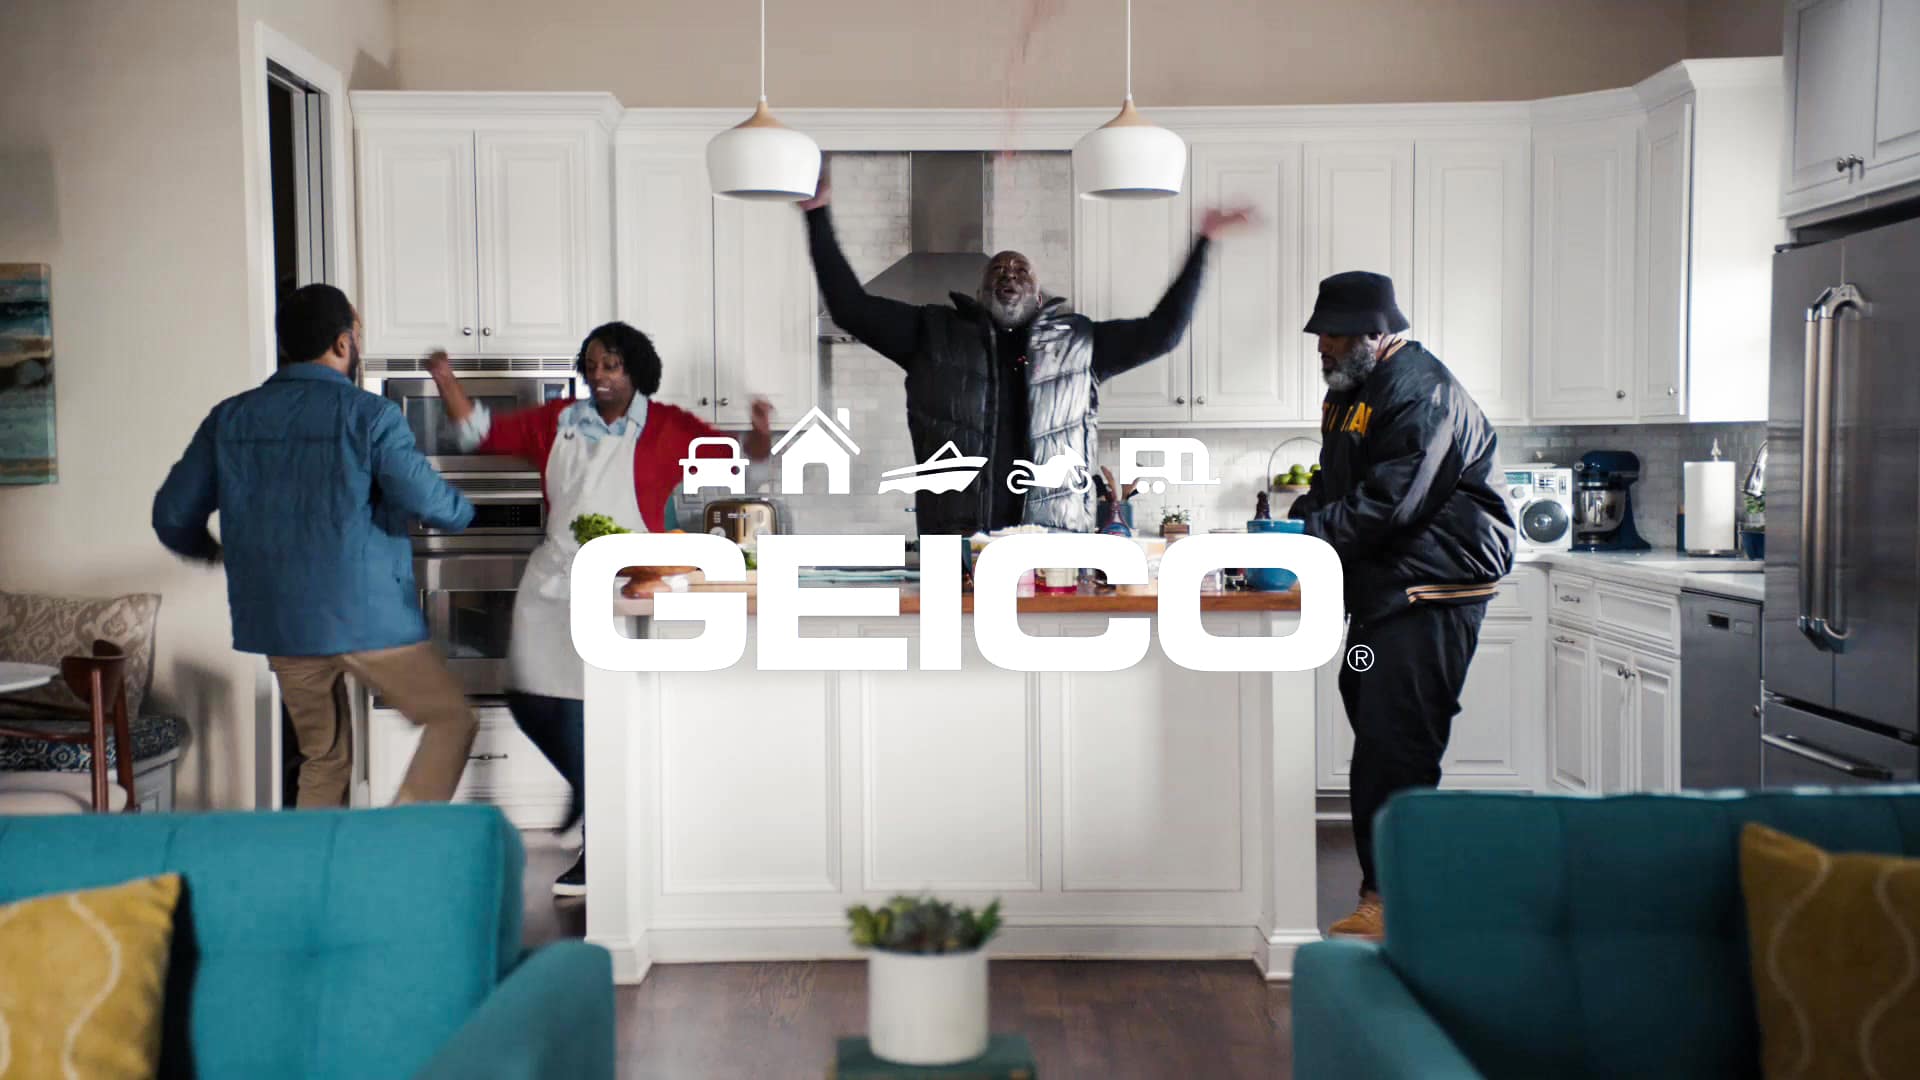 end of geico scoop there it is commercial featuring Tag Team